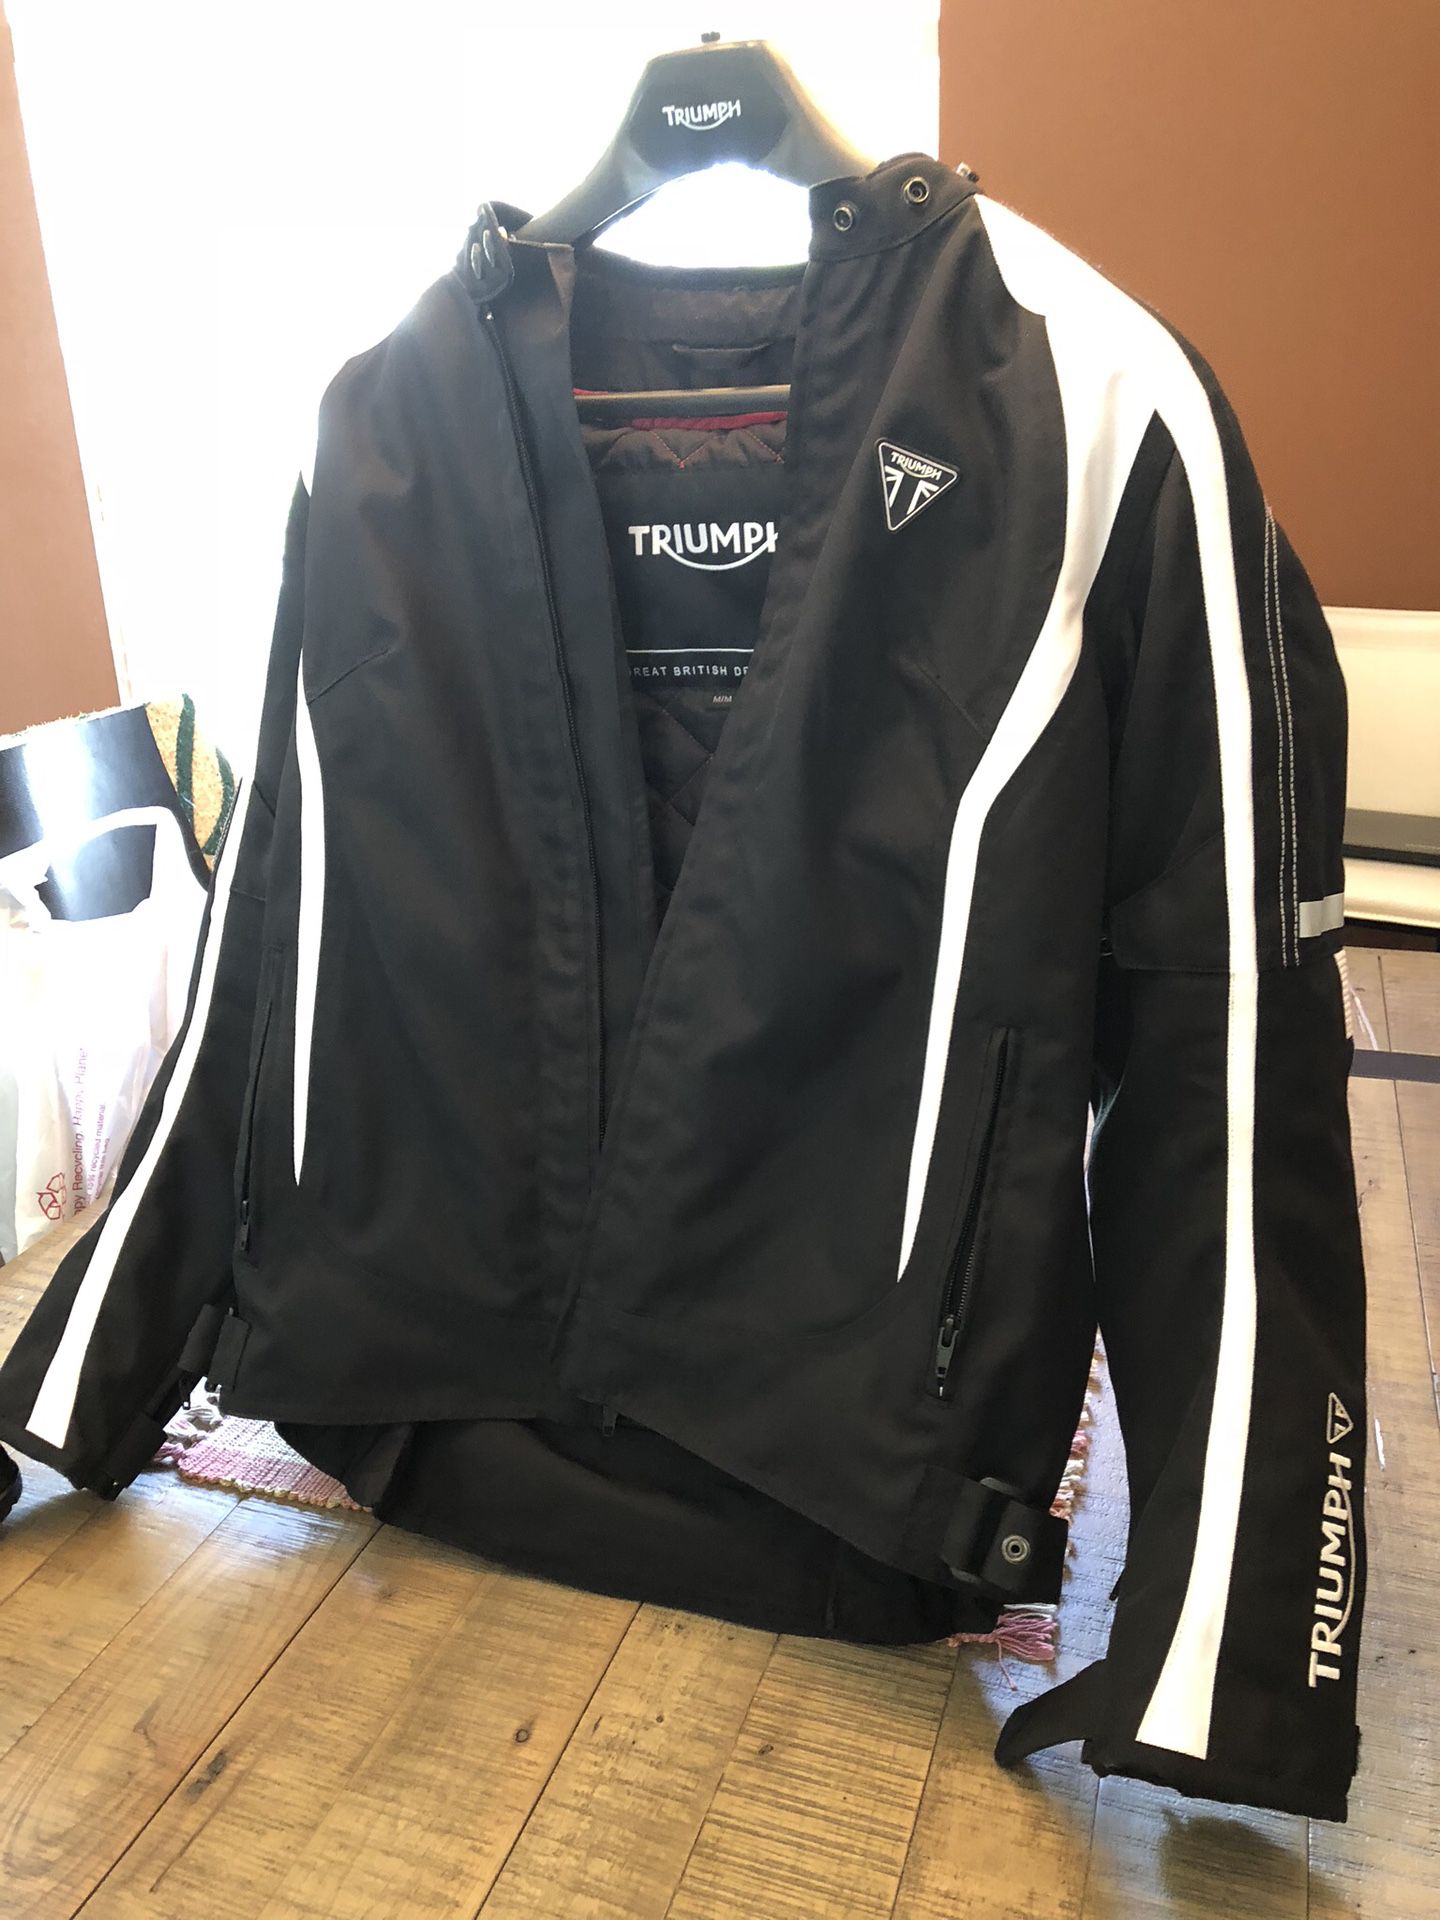 Triumph Motorcycle jacket with protection pads-new